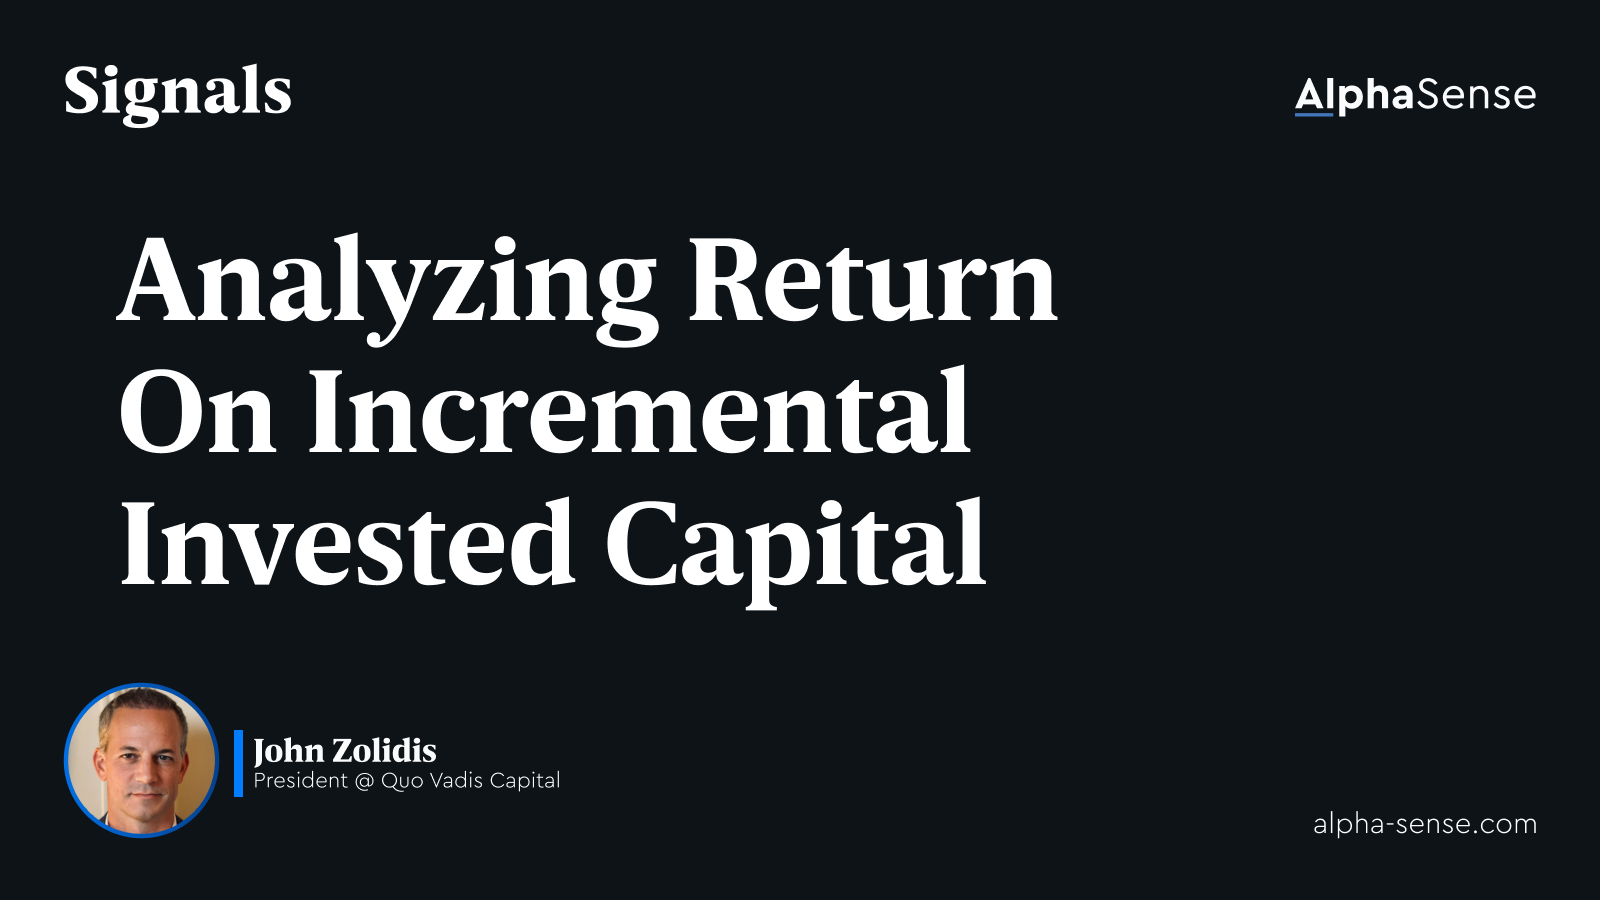 Analyzing Return on Incremental Invested Capital | Signals by AlphaSense Podcast